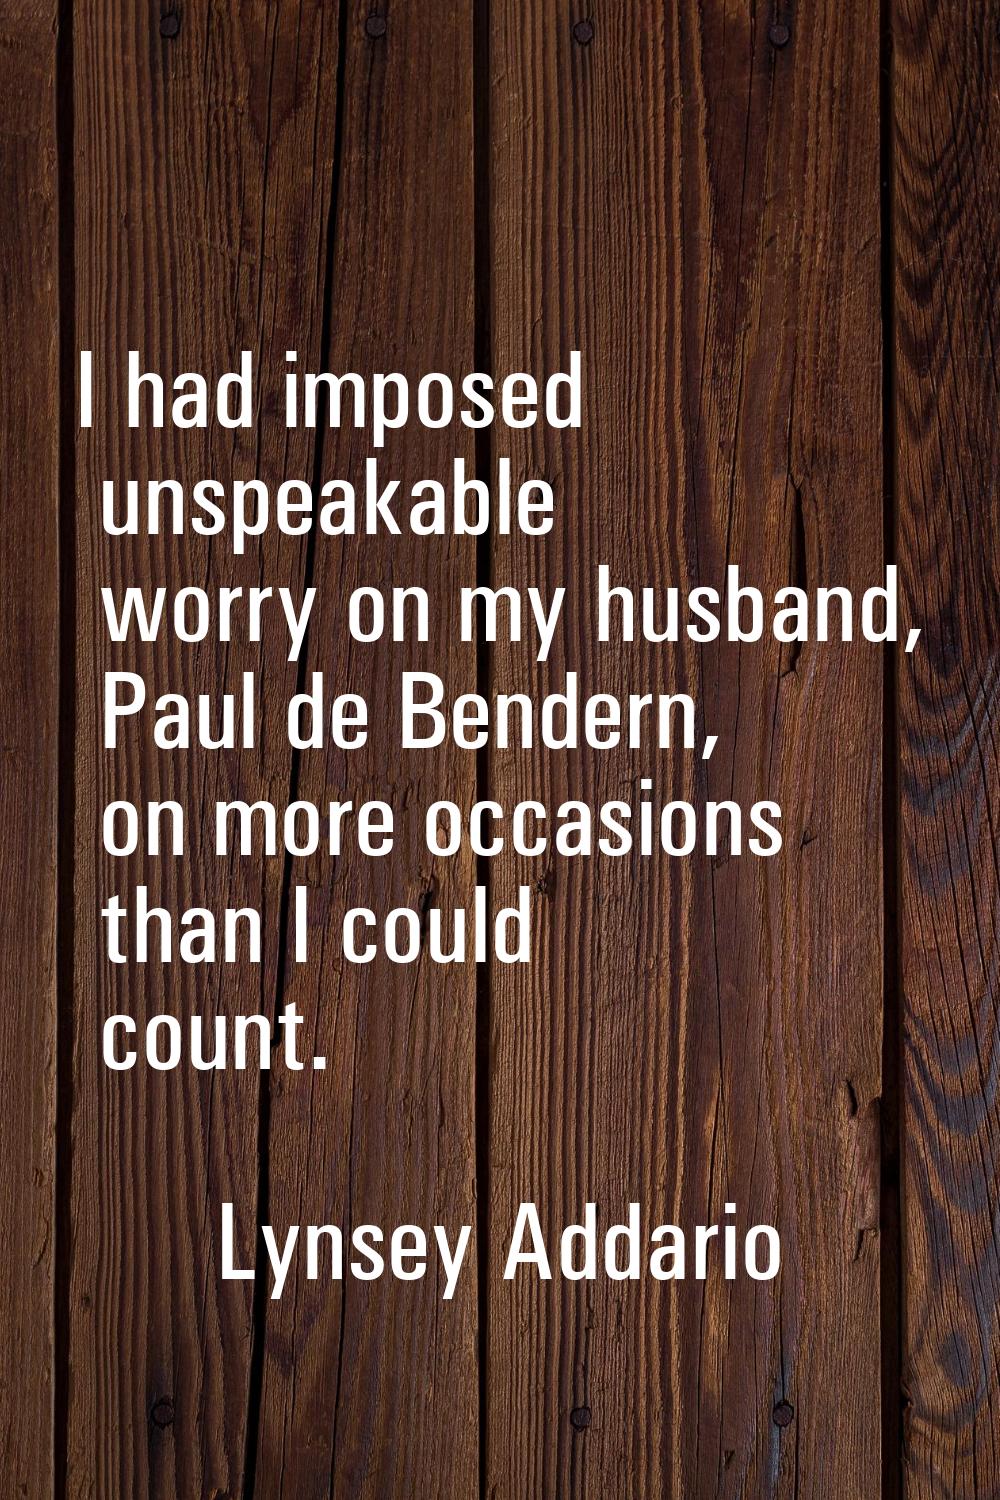 I had imposed unspeakable worry on my husband, Paul de Bendern, on more occasions than I could coun